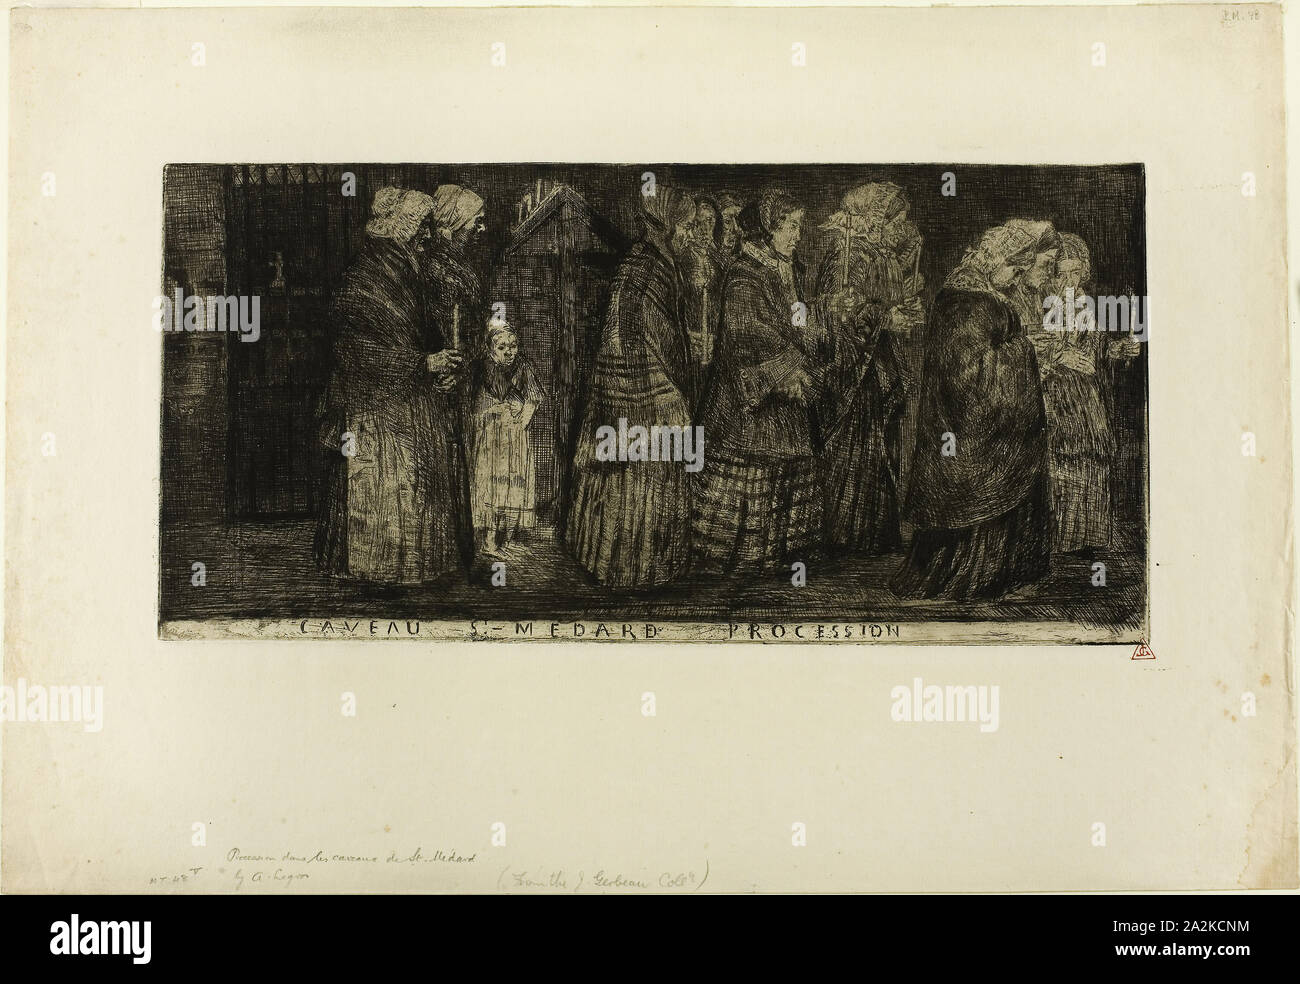 Procession in the Crypt of St. Medard, 1859, Alphonse Legros, French, 1837-1911, France, Etching on cream laid paper, 194 × 401 mm (plate), 356 × 520 mm (sheet Stock Photo